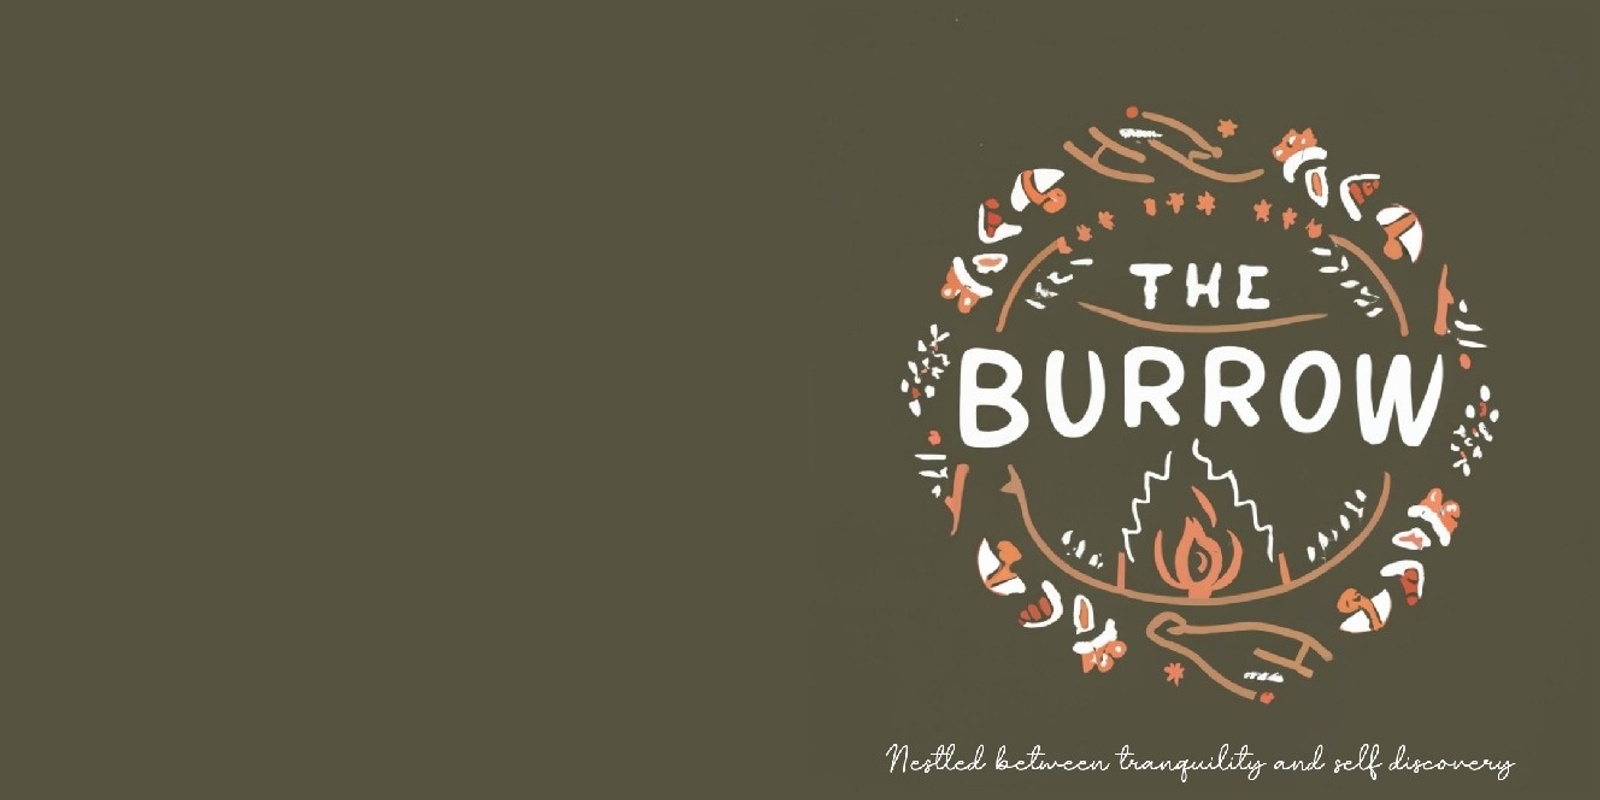 The Burrow's banner